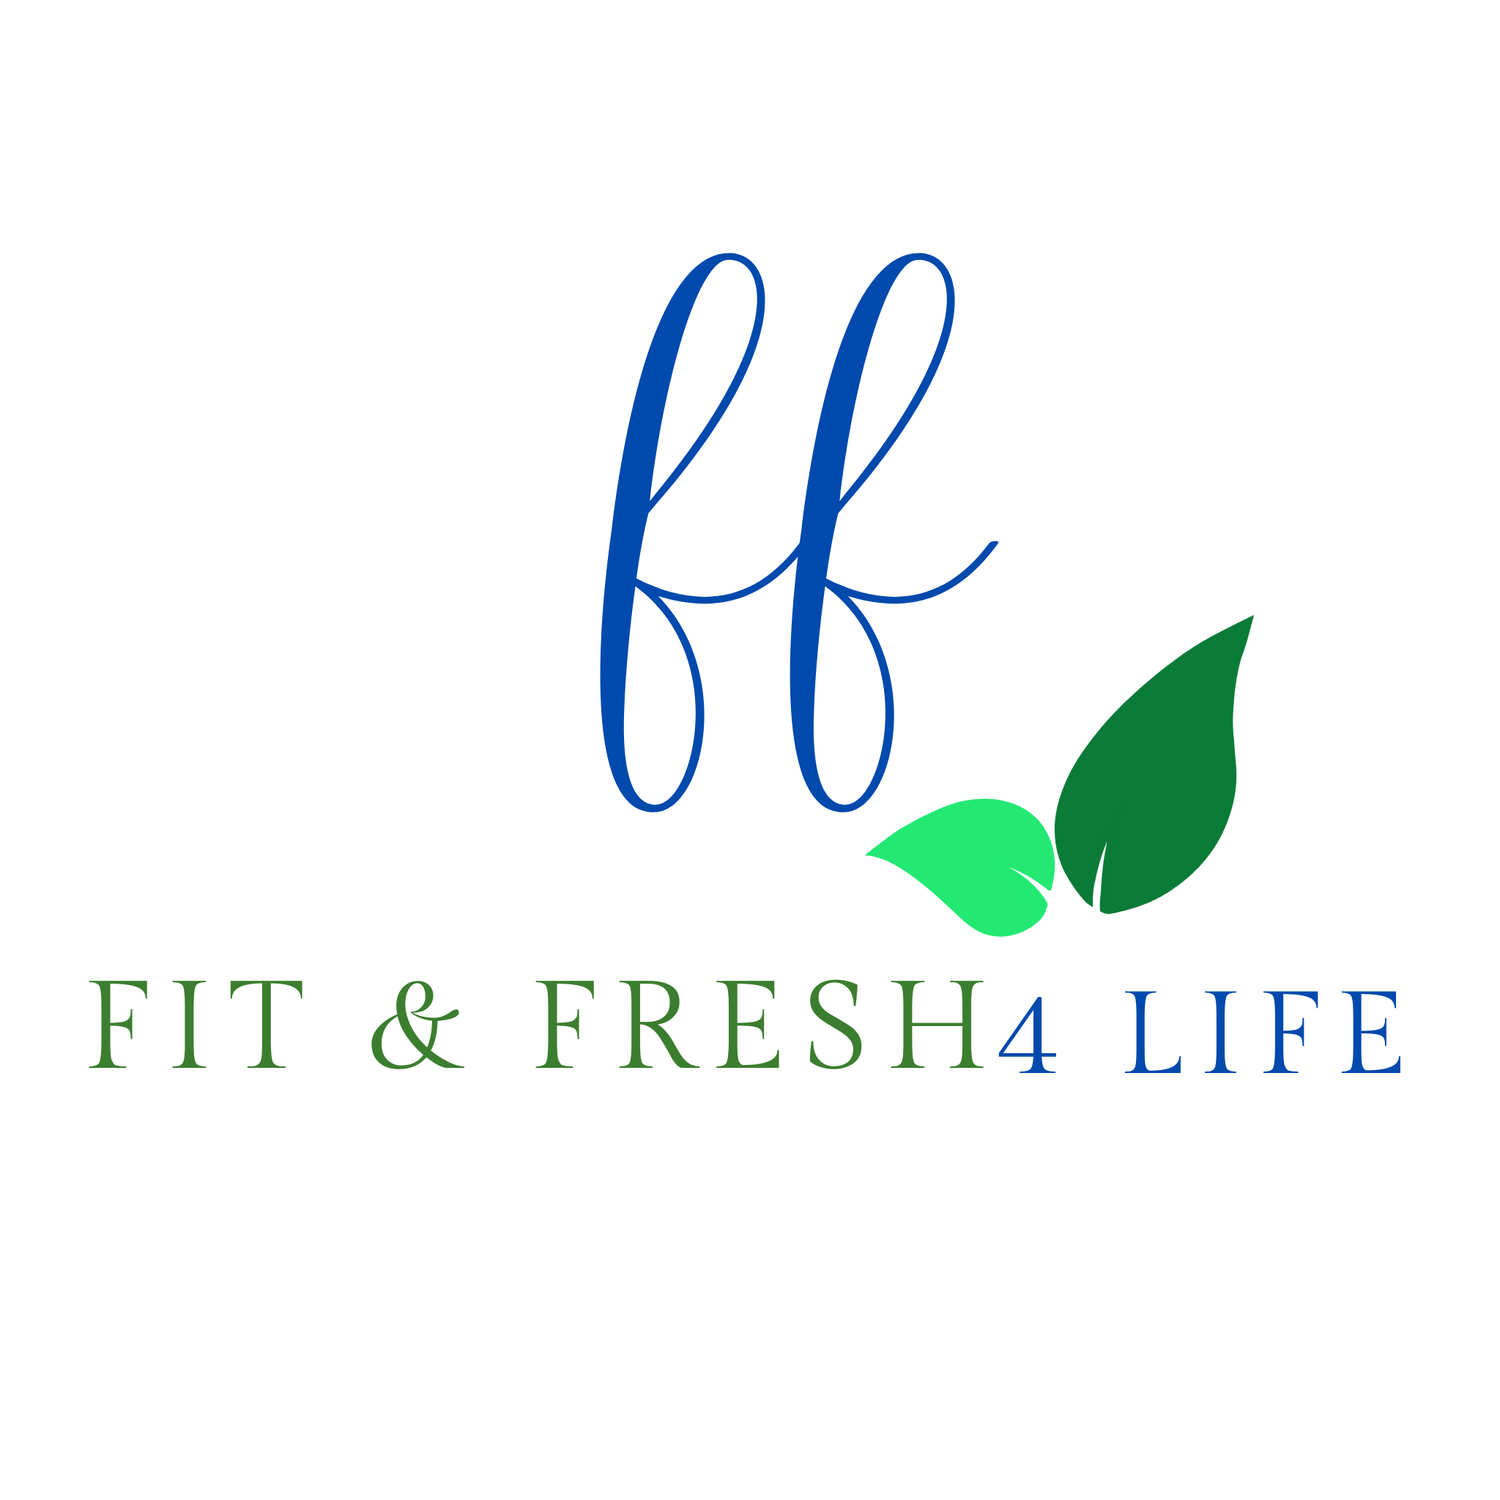 Fit And Fresh 4 Life